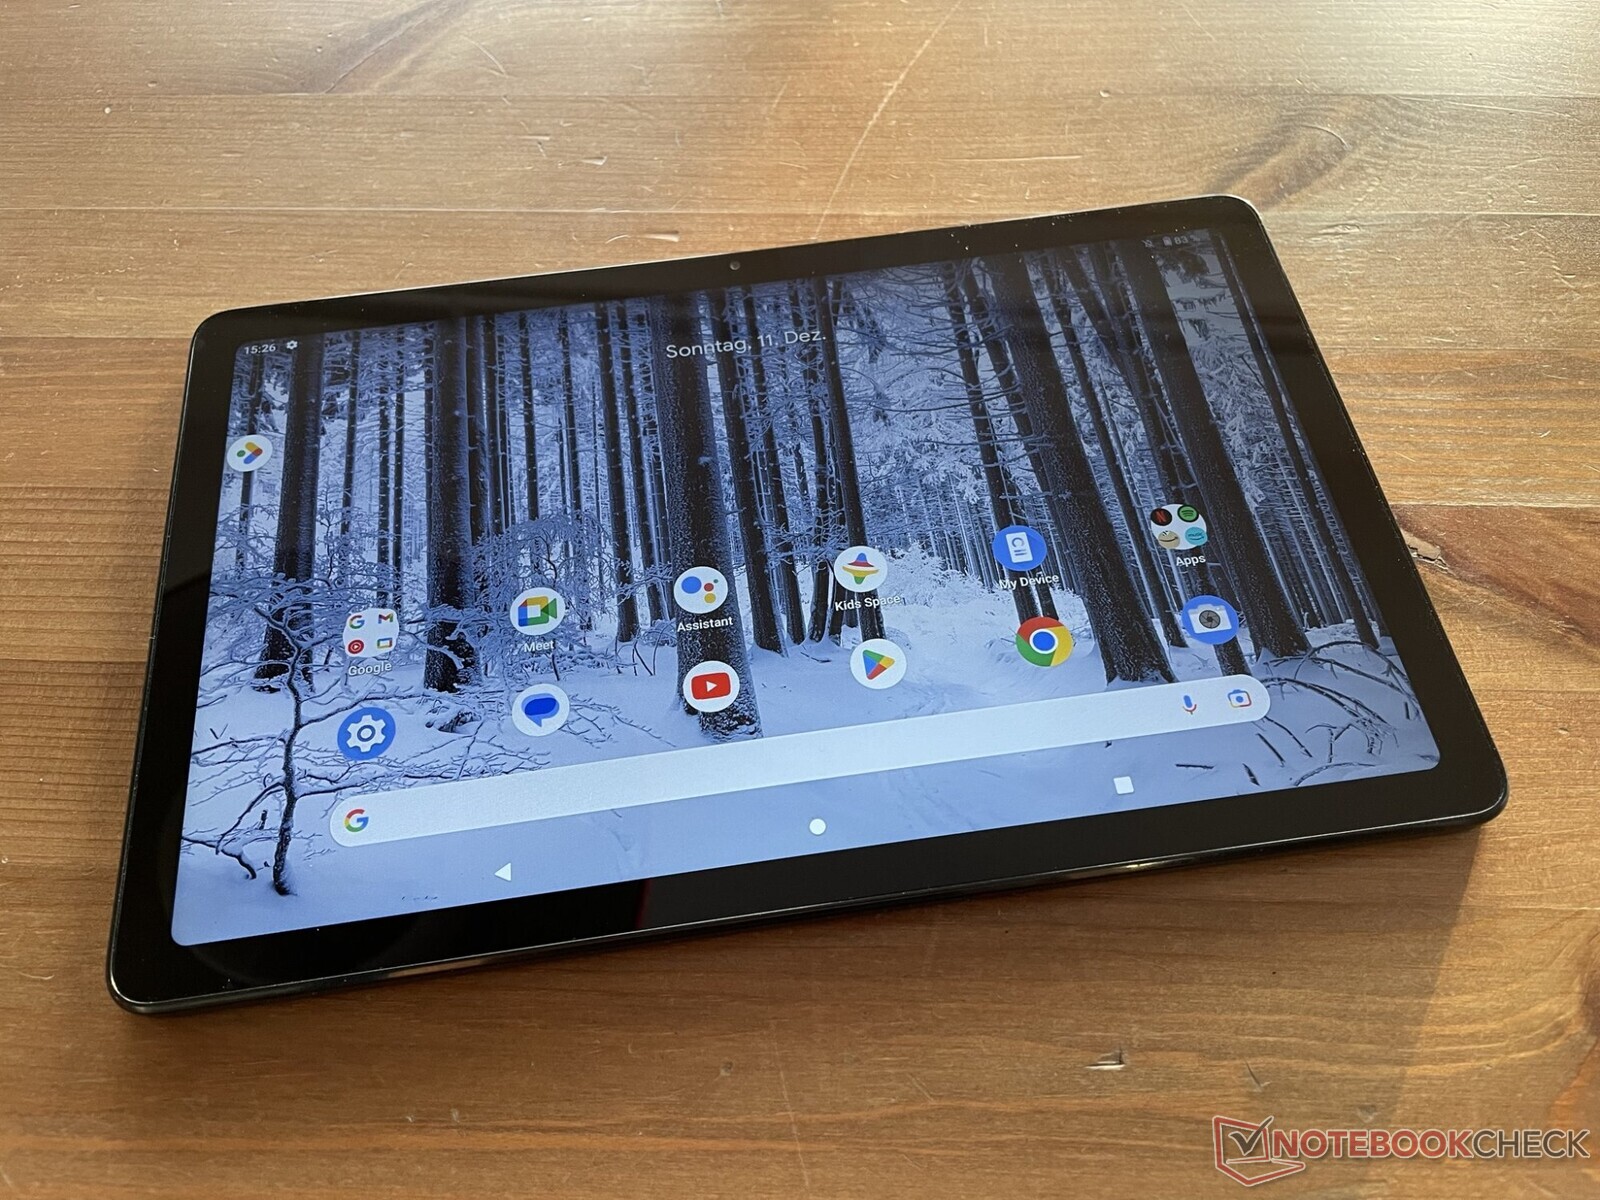 Nokia T21: HMD Global finally releases Android 12 tablet in US